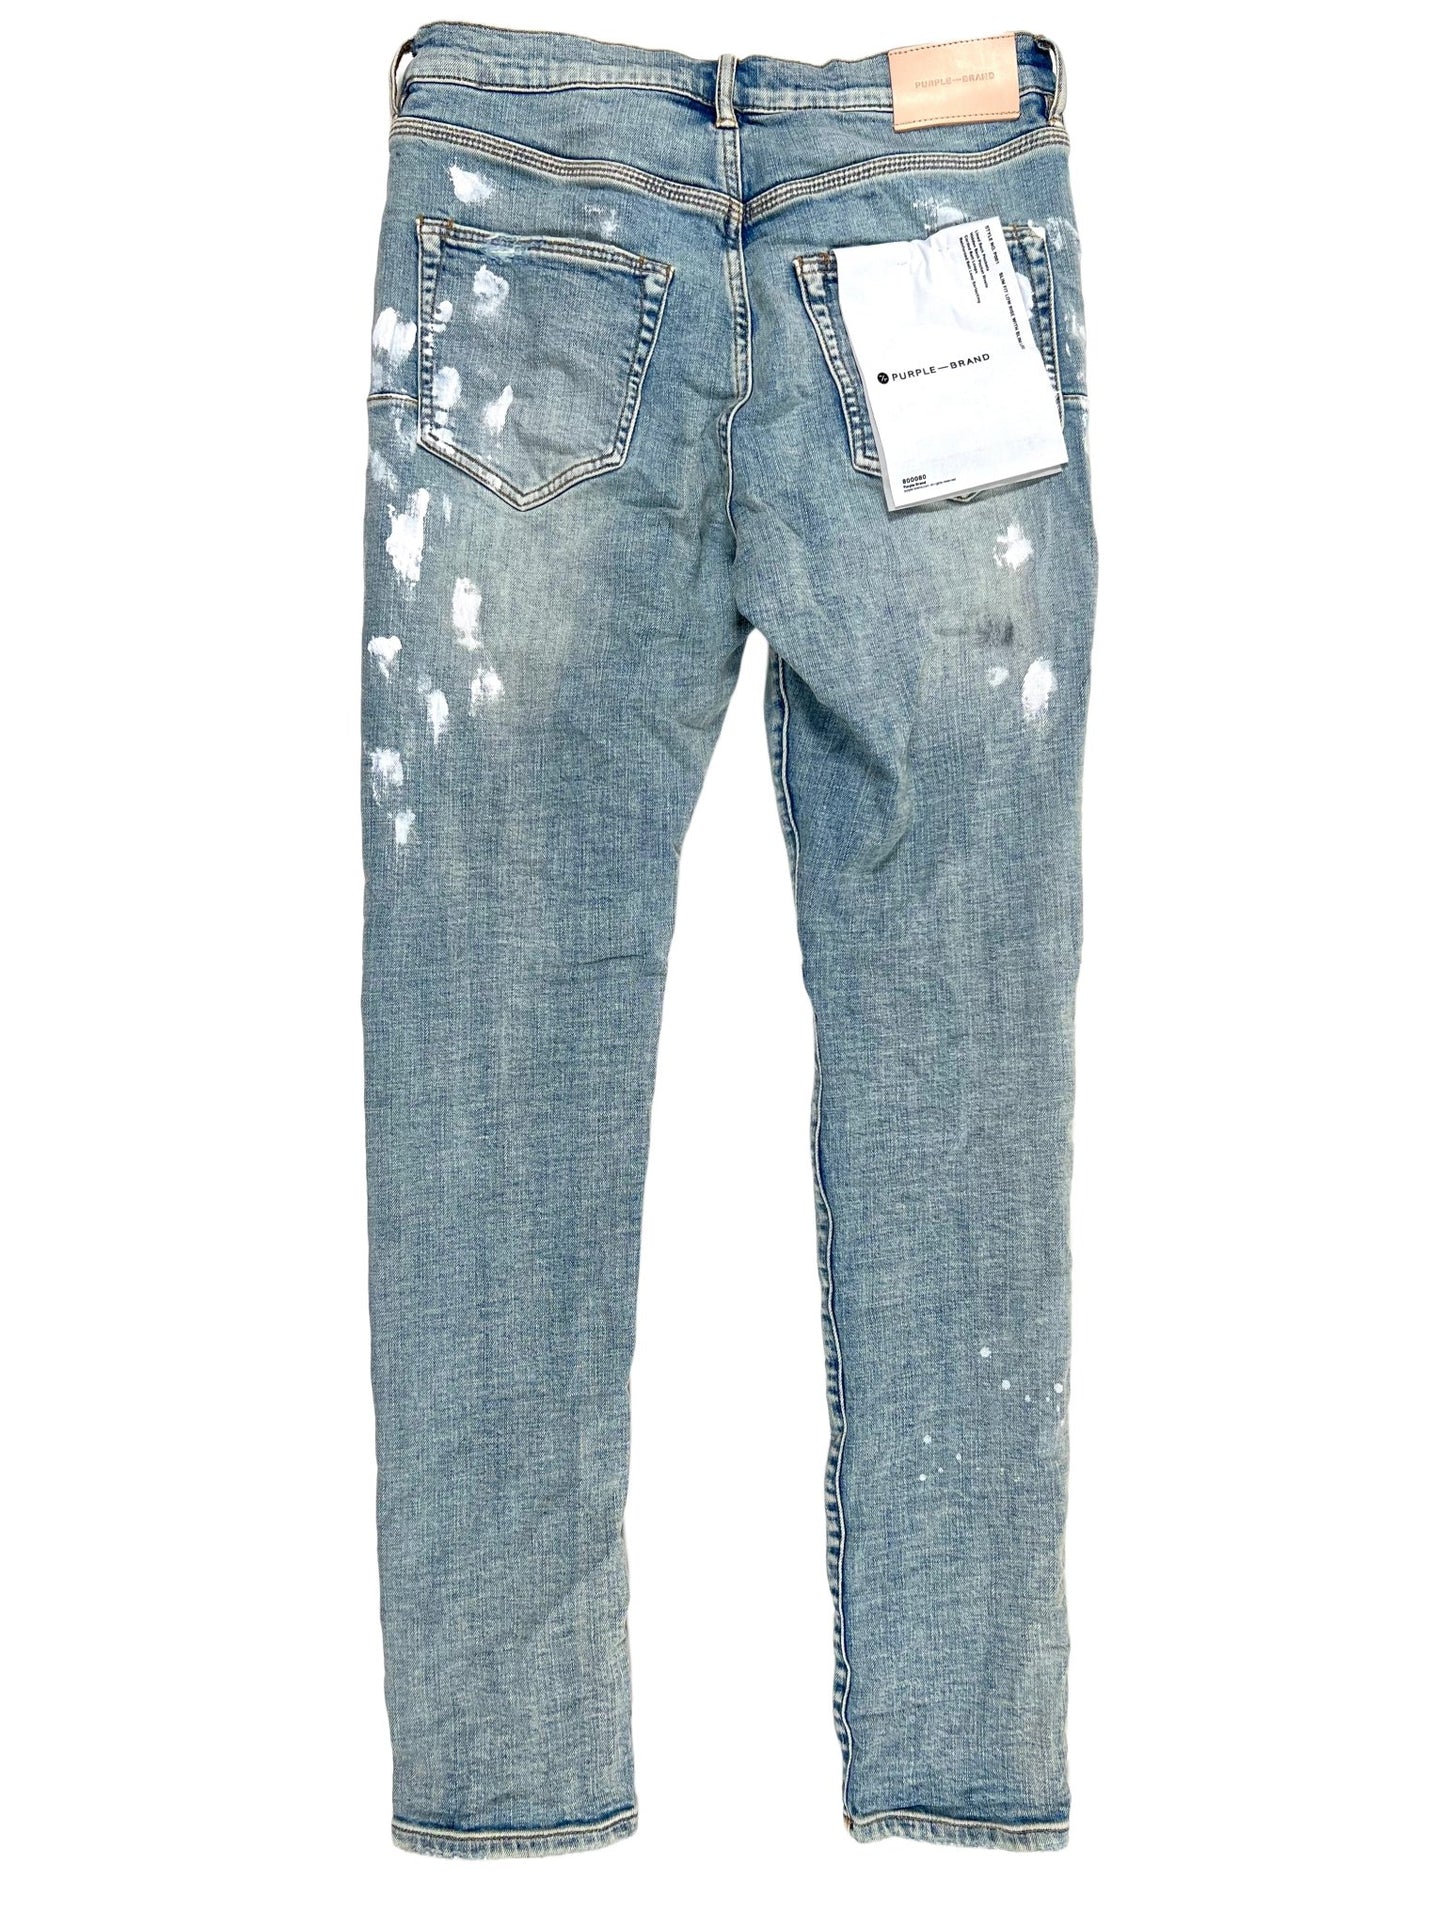 A pair of Purple Brand Jeans P001-LIA Light Indigo Paint Blowout with white spots on them.